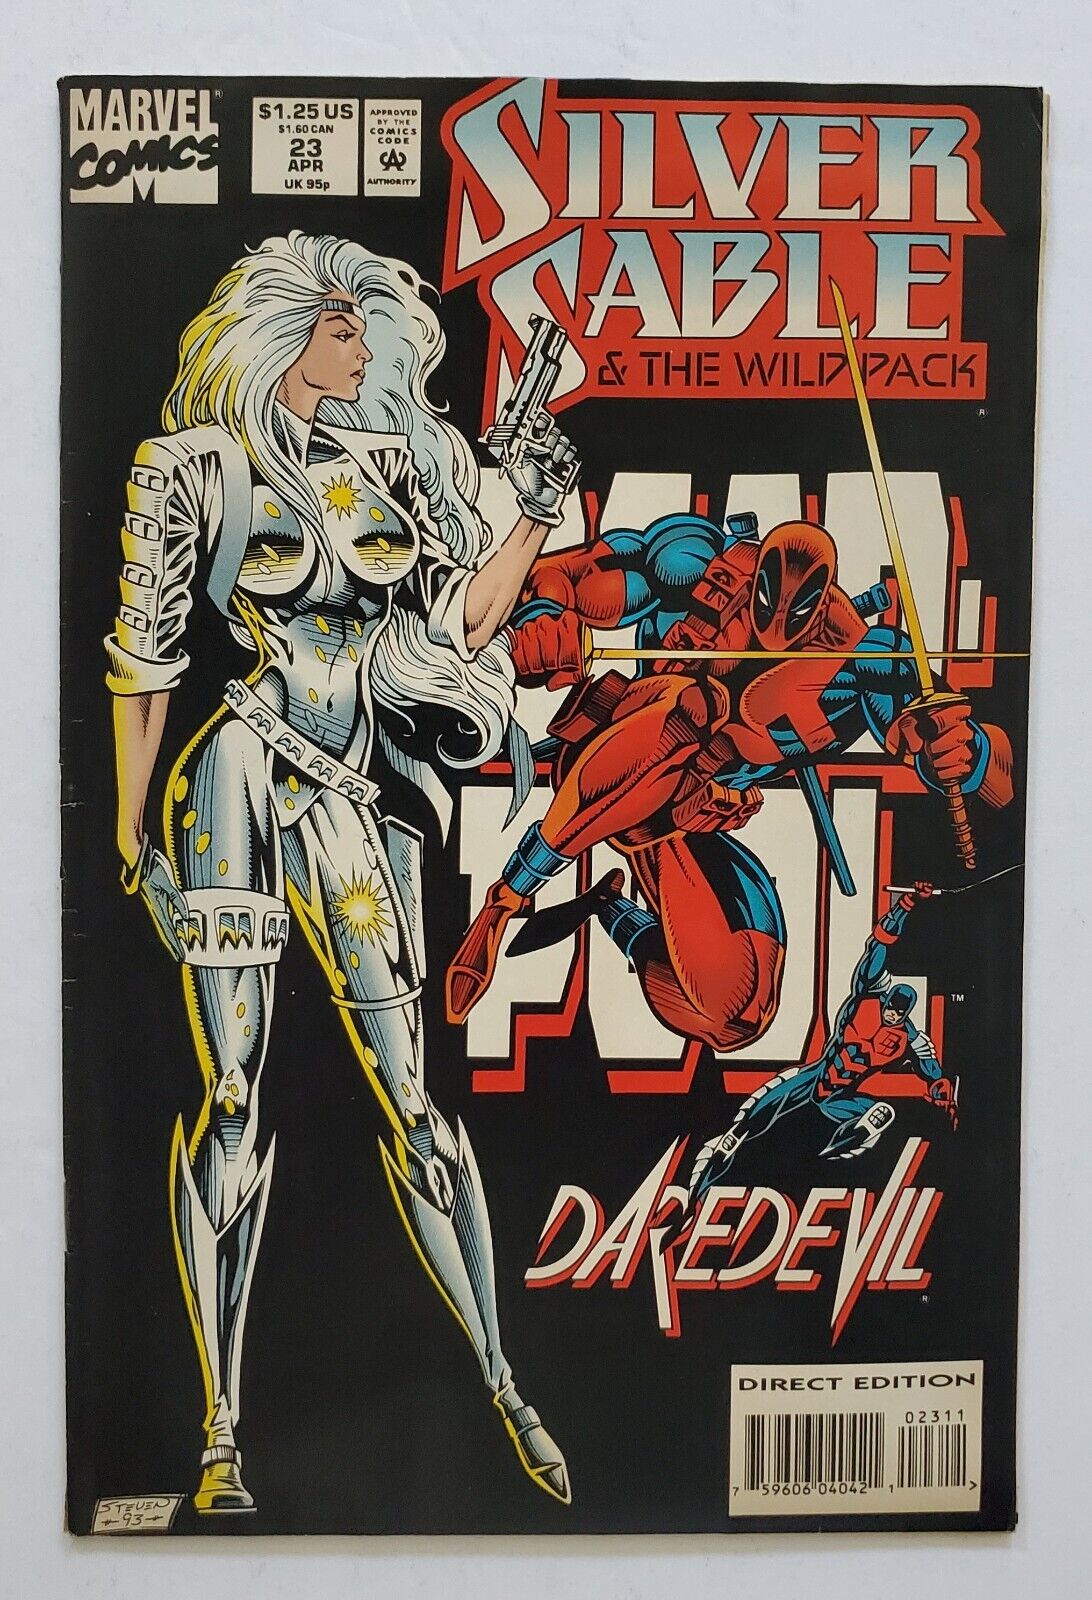 SILVER SABLE And Wild Pack #23 (Marvel Comics 1994) Early DEADPOOL Cover